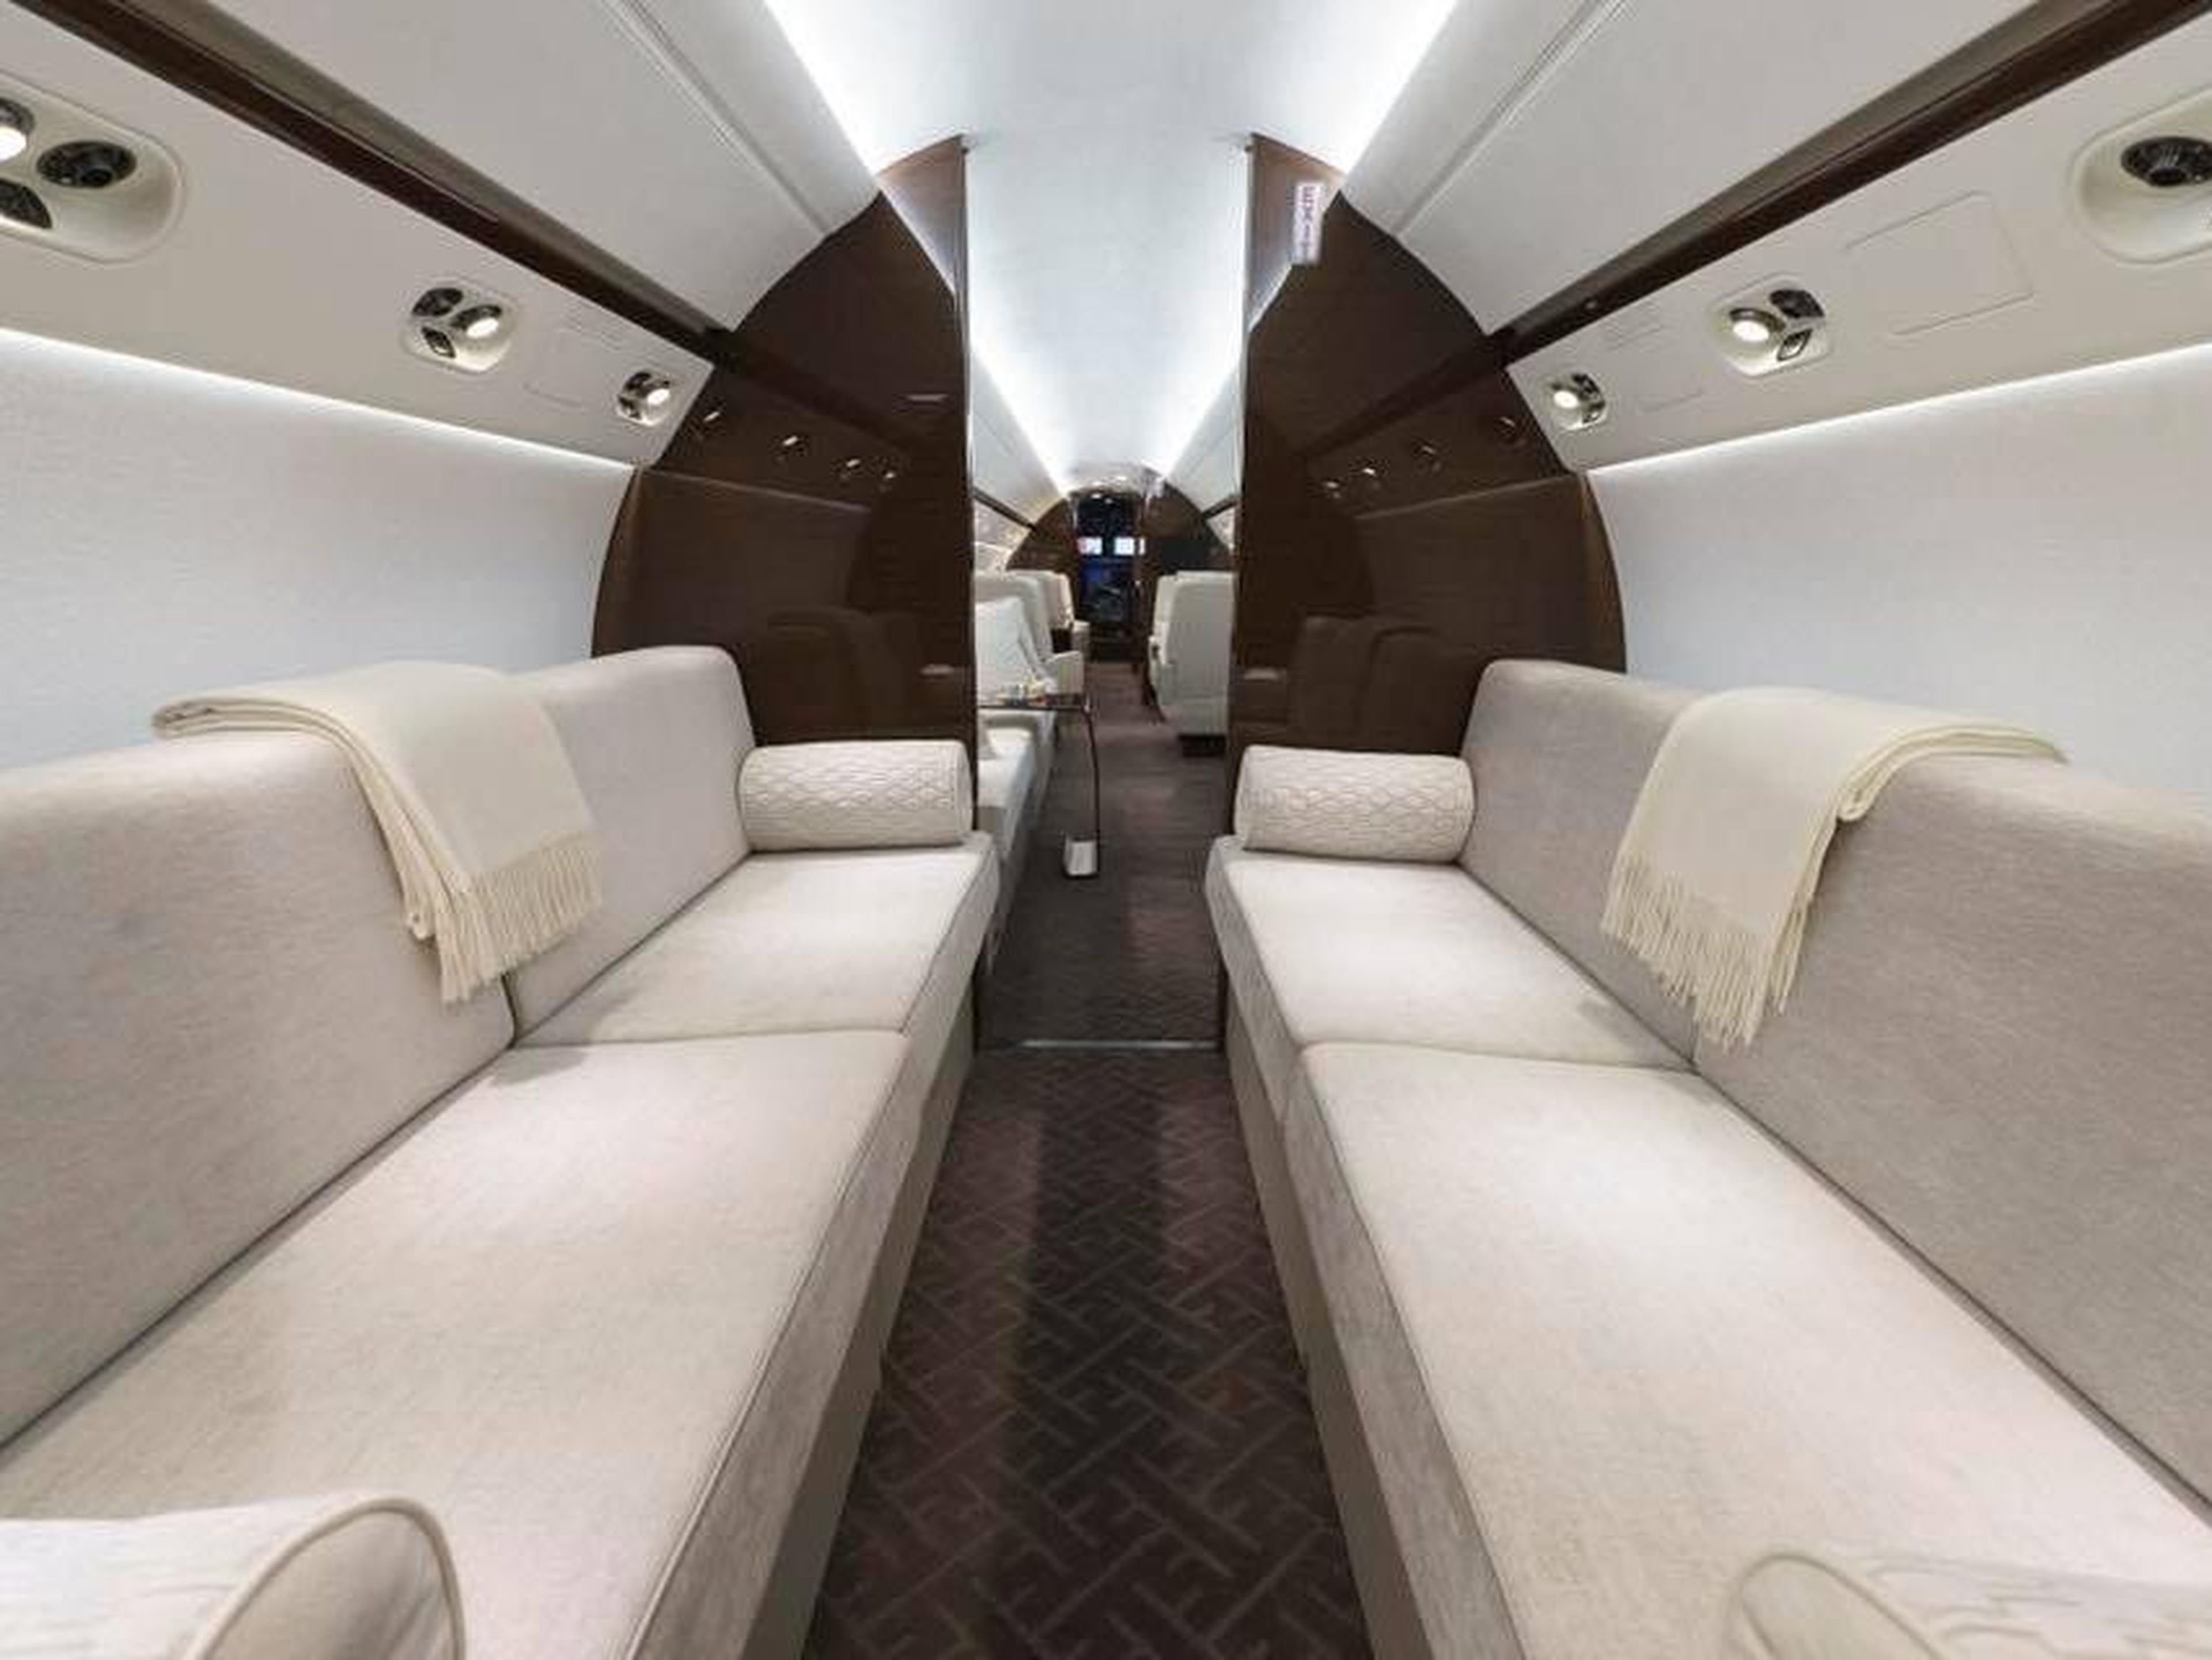 On some private planes, you can stretch out on a sofa instead of being squished between other passengers.